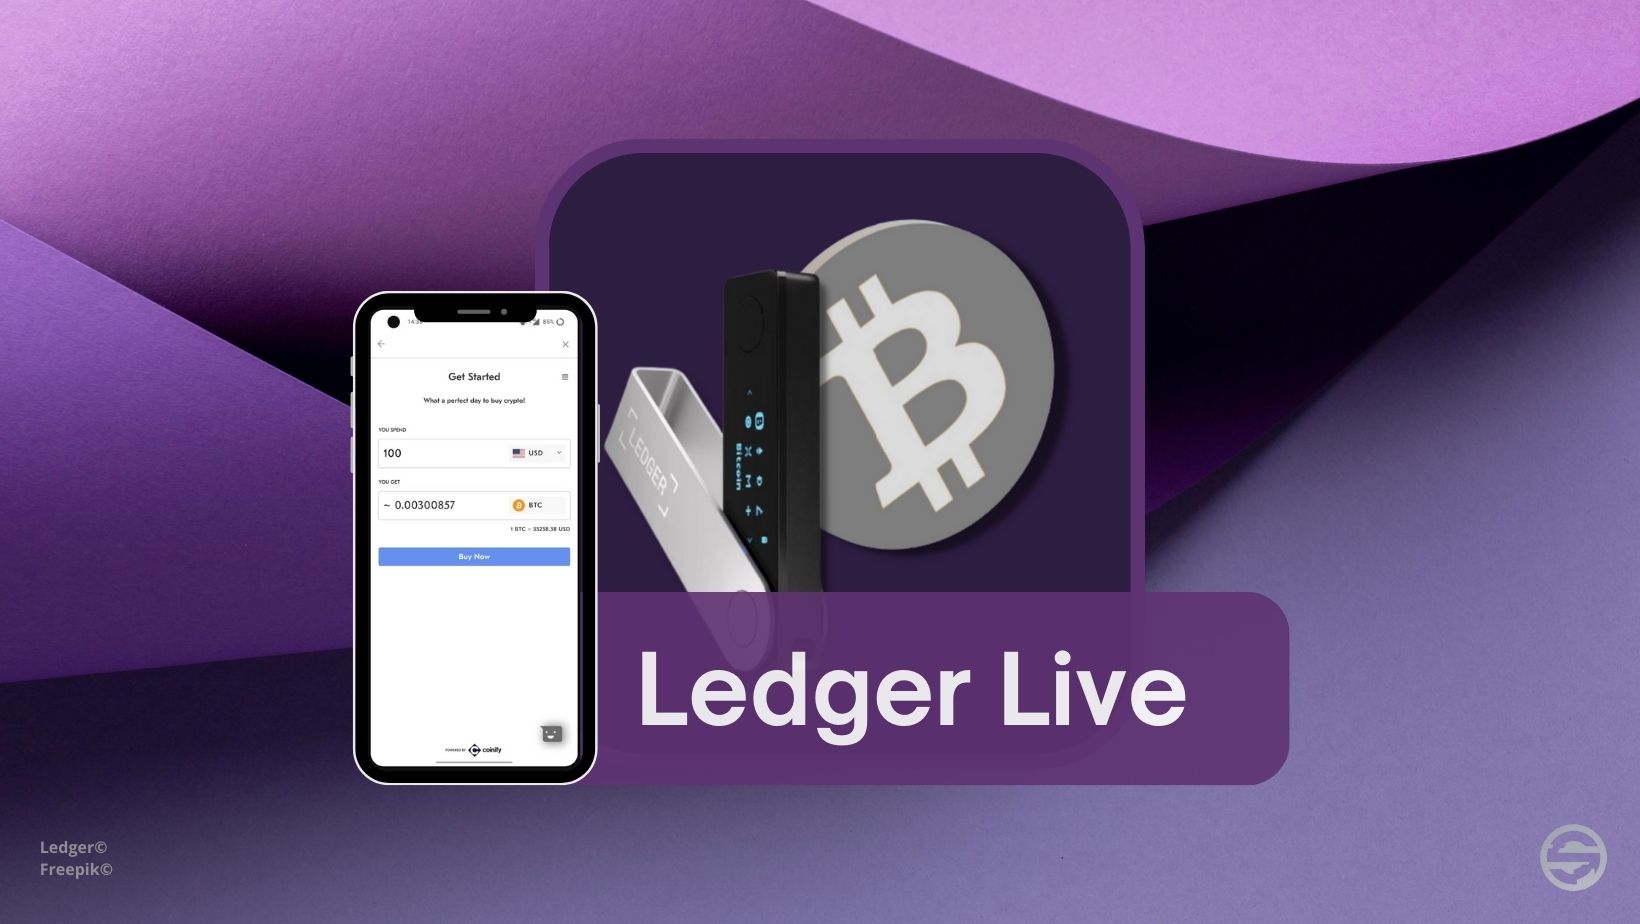 Protecting Your Crypto Assets: How Secure Is the Ledger Nano X